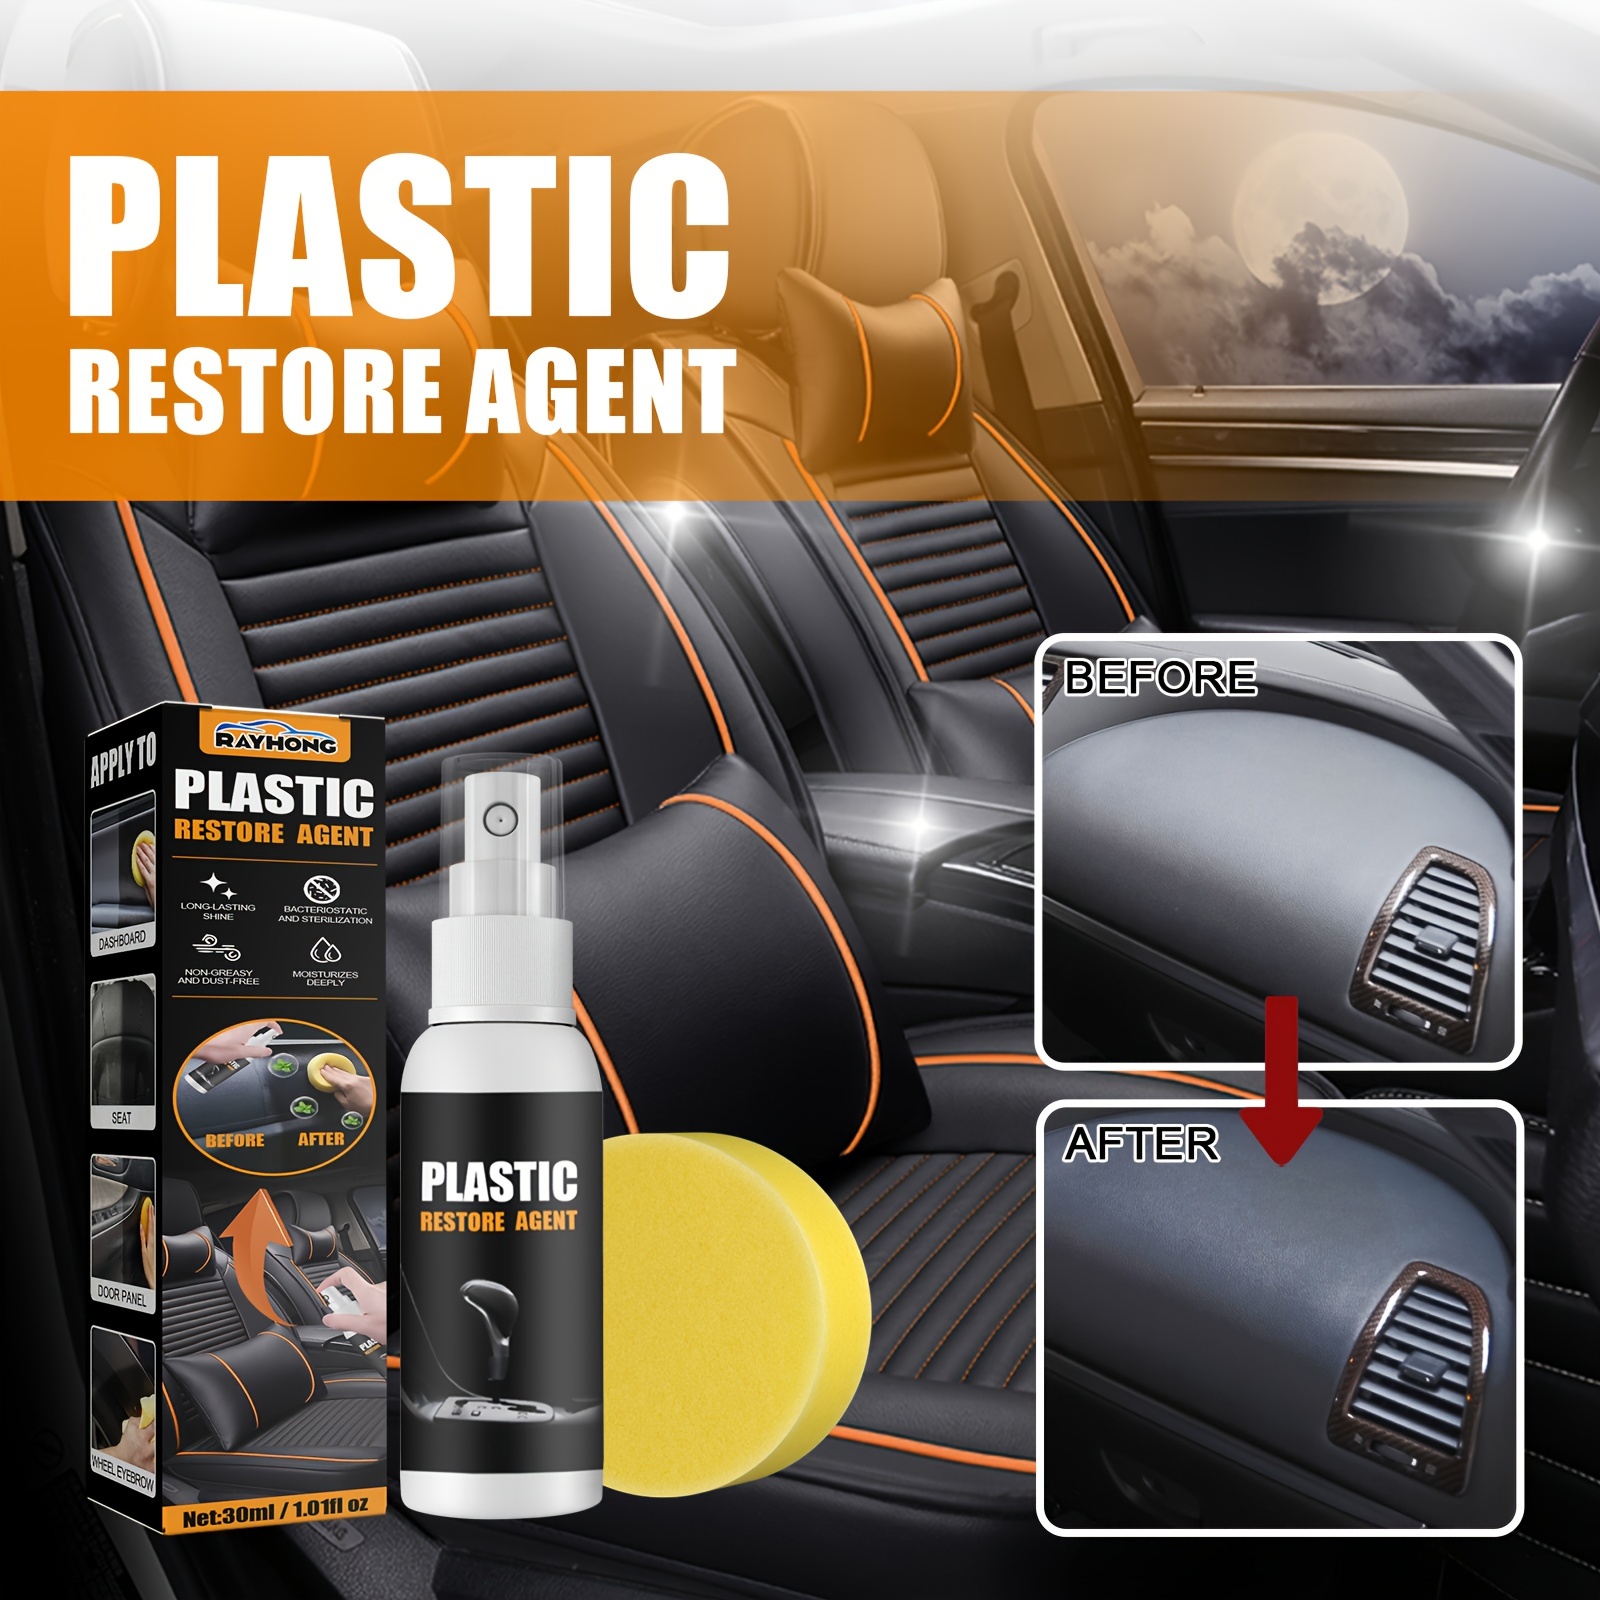 Wholesale car plastic restorer For Maintaining Vehicles In Proper  Condition